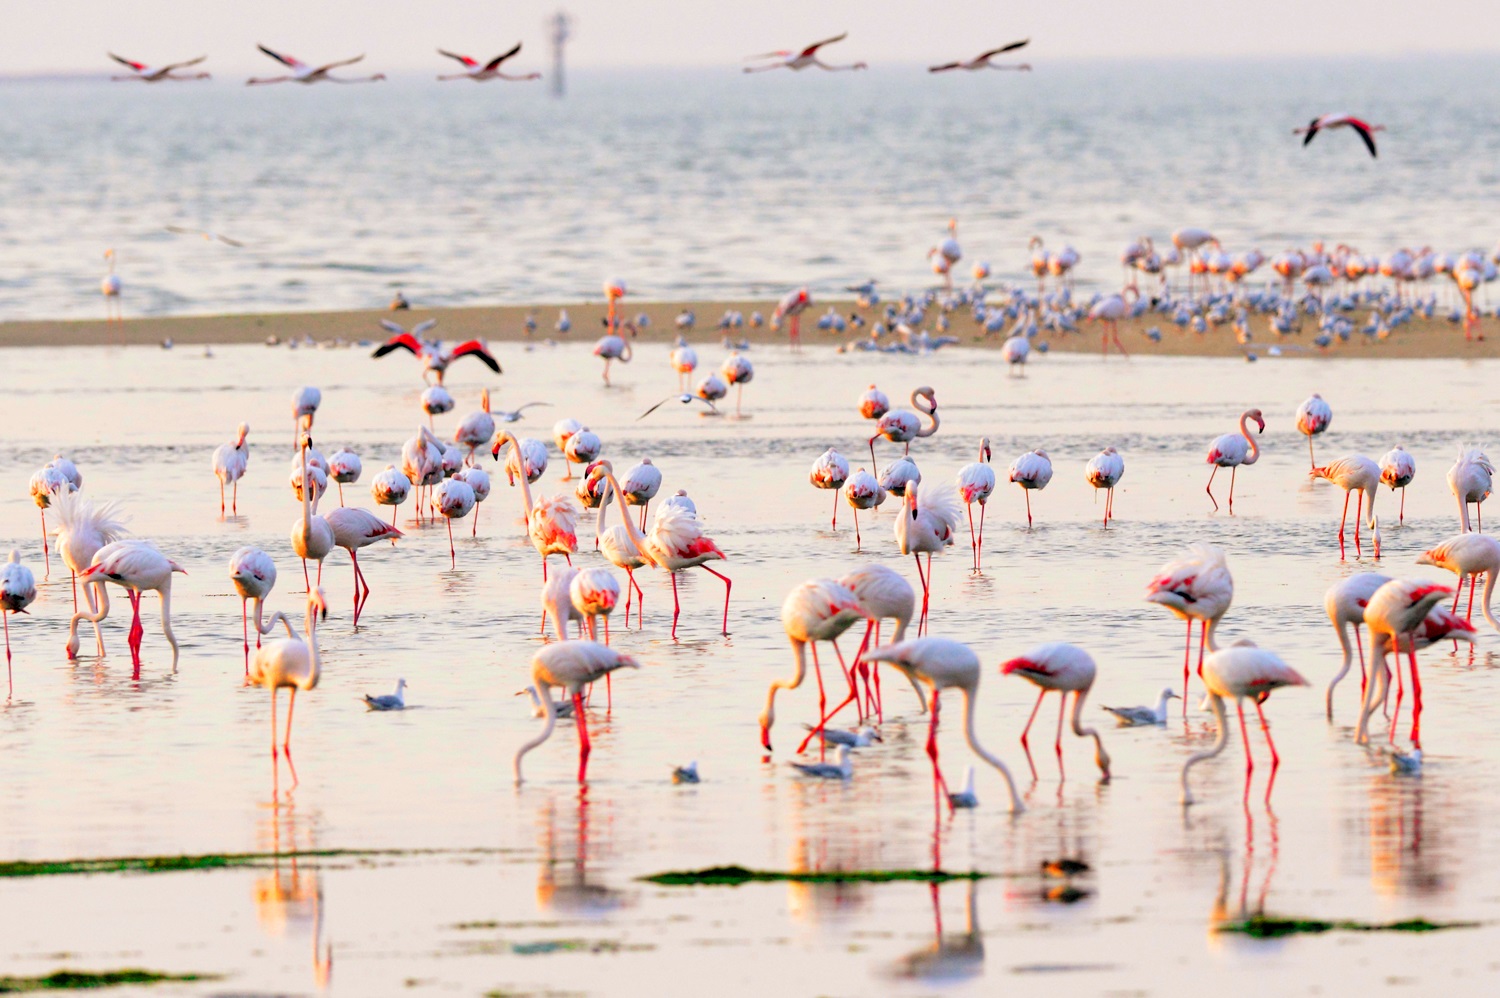 Kuwait's bay is an important stop for the immigrant birds